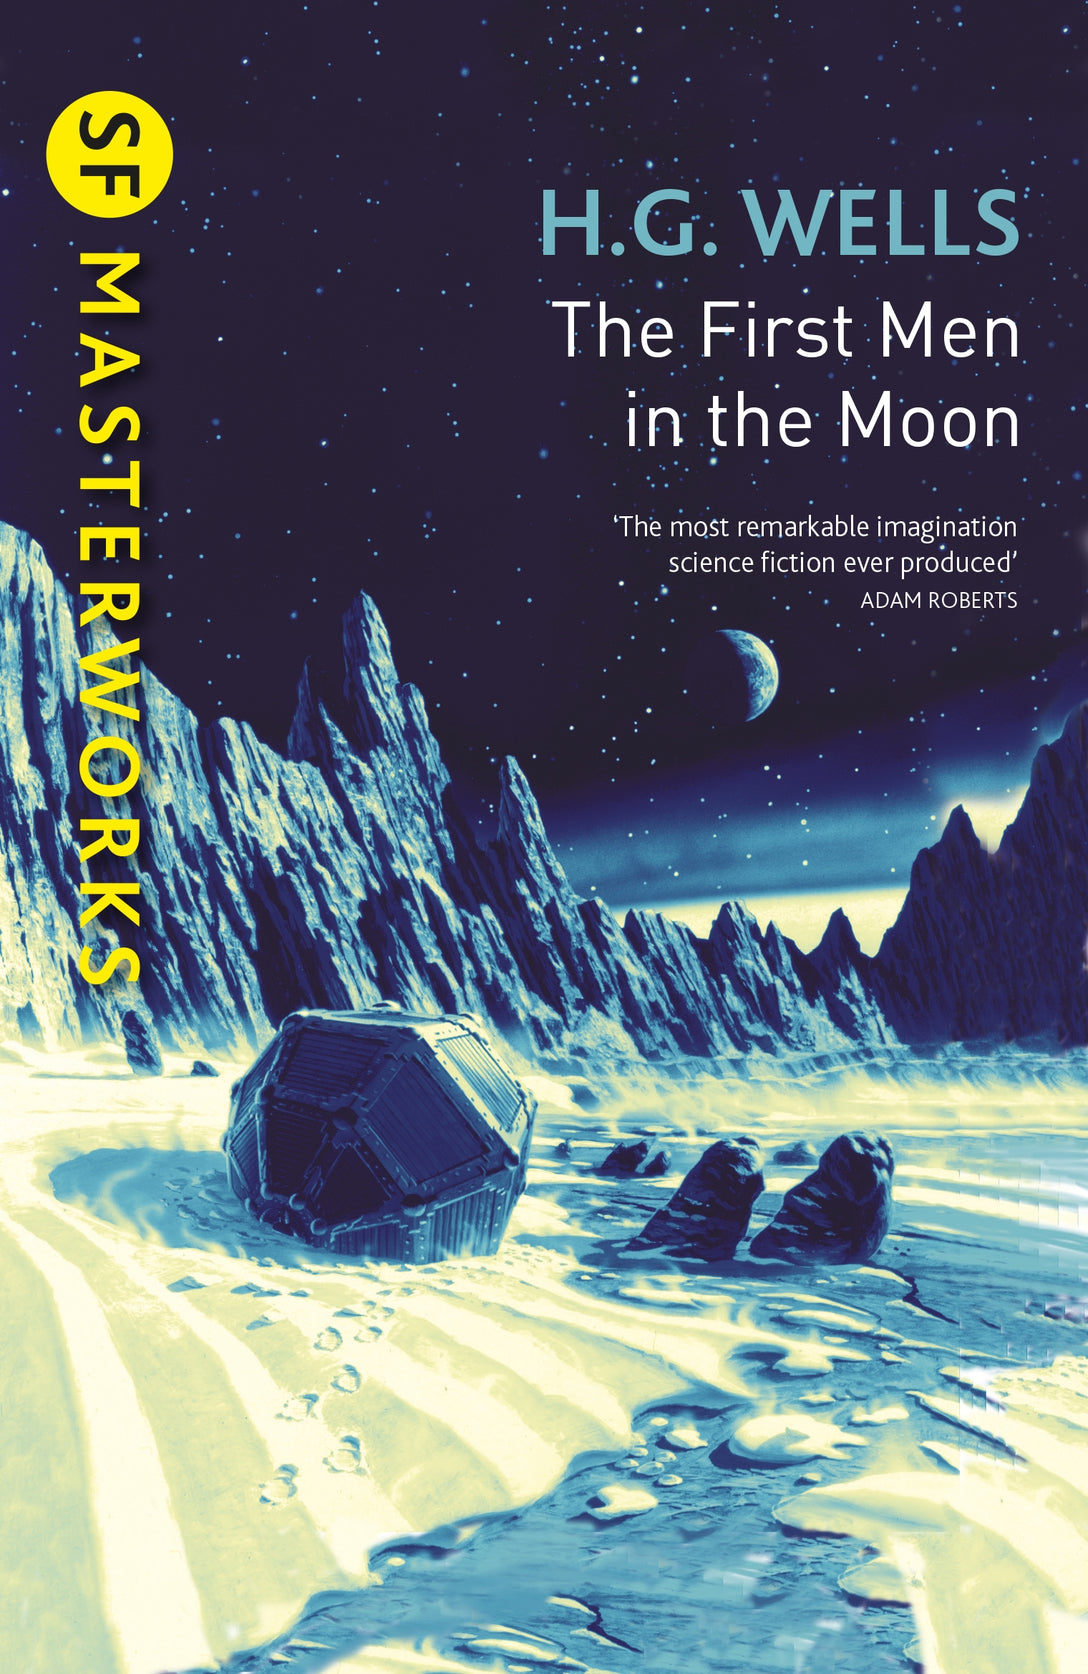 The First Men In The Moon by H.G. Wells